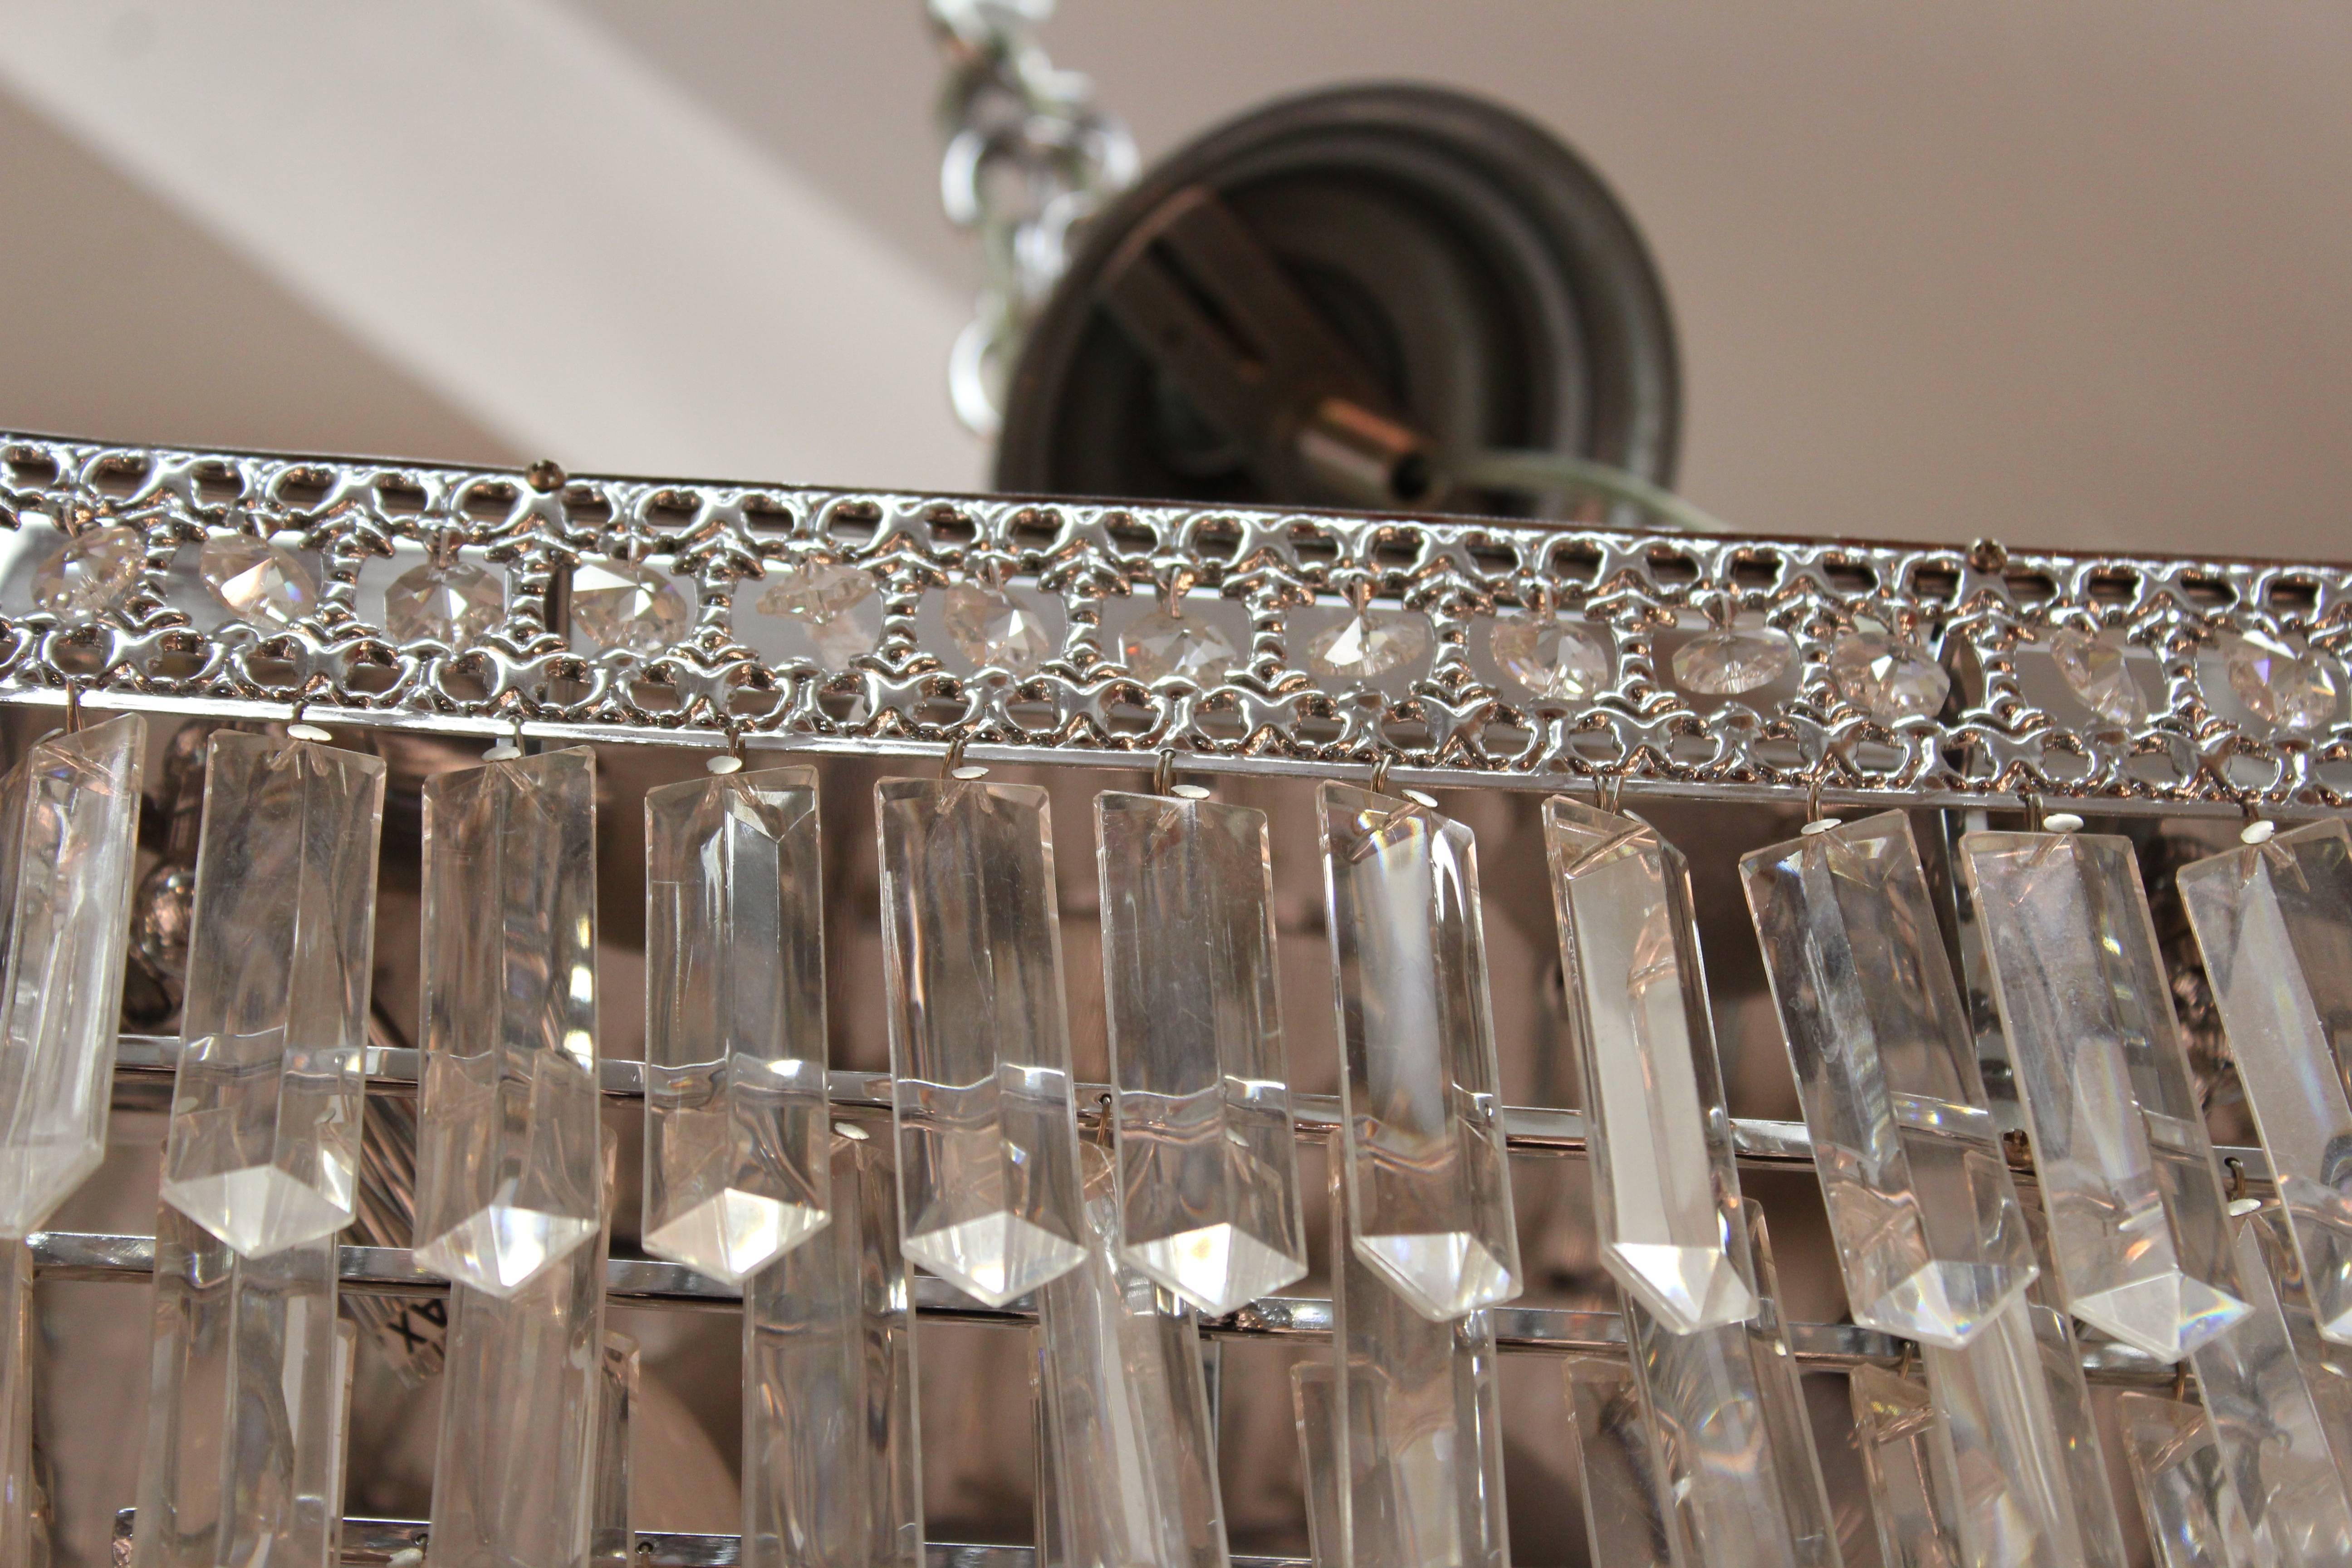 Mid-20th Century Italian Mid-Century Modern Chrome Chandelier with Murano Crystal Prisms